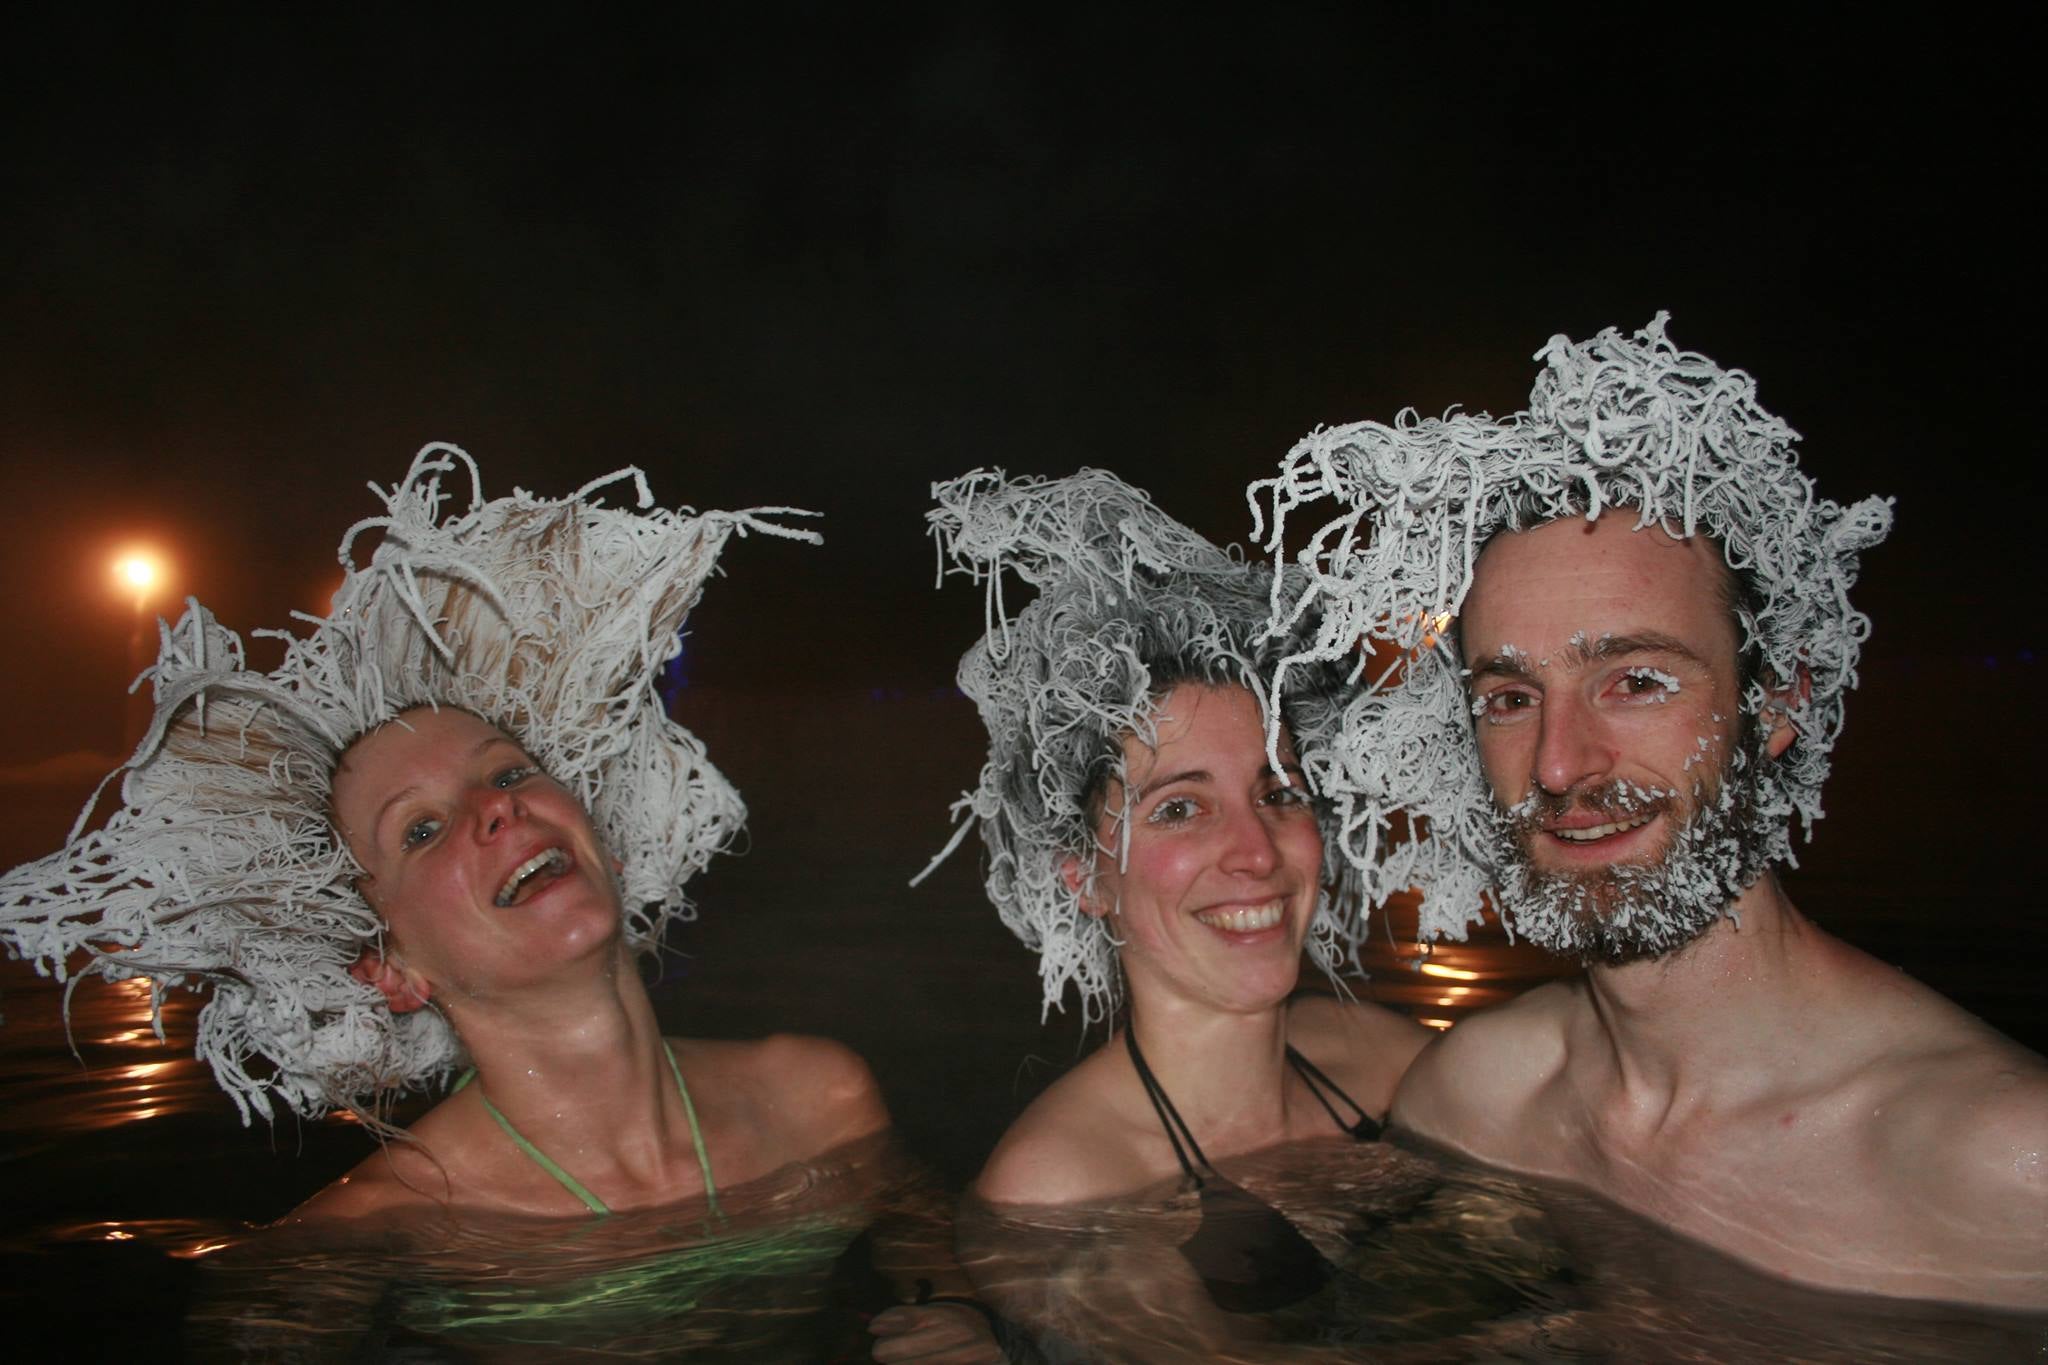 Takhini Hot Pools has an annual hair freezing competition